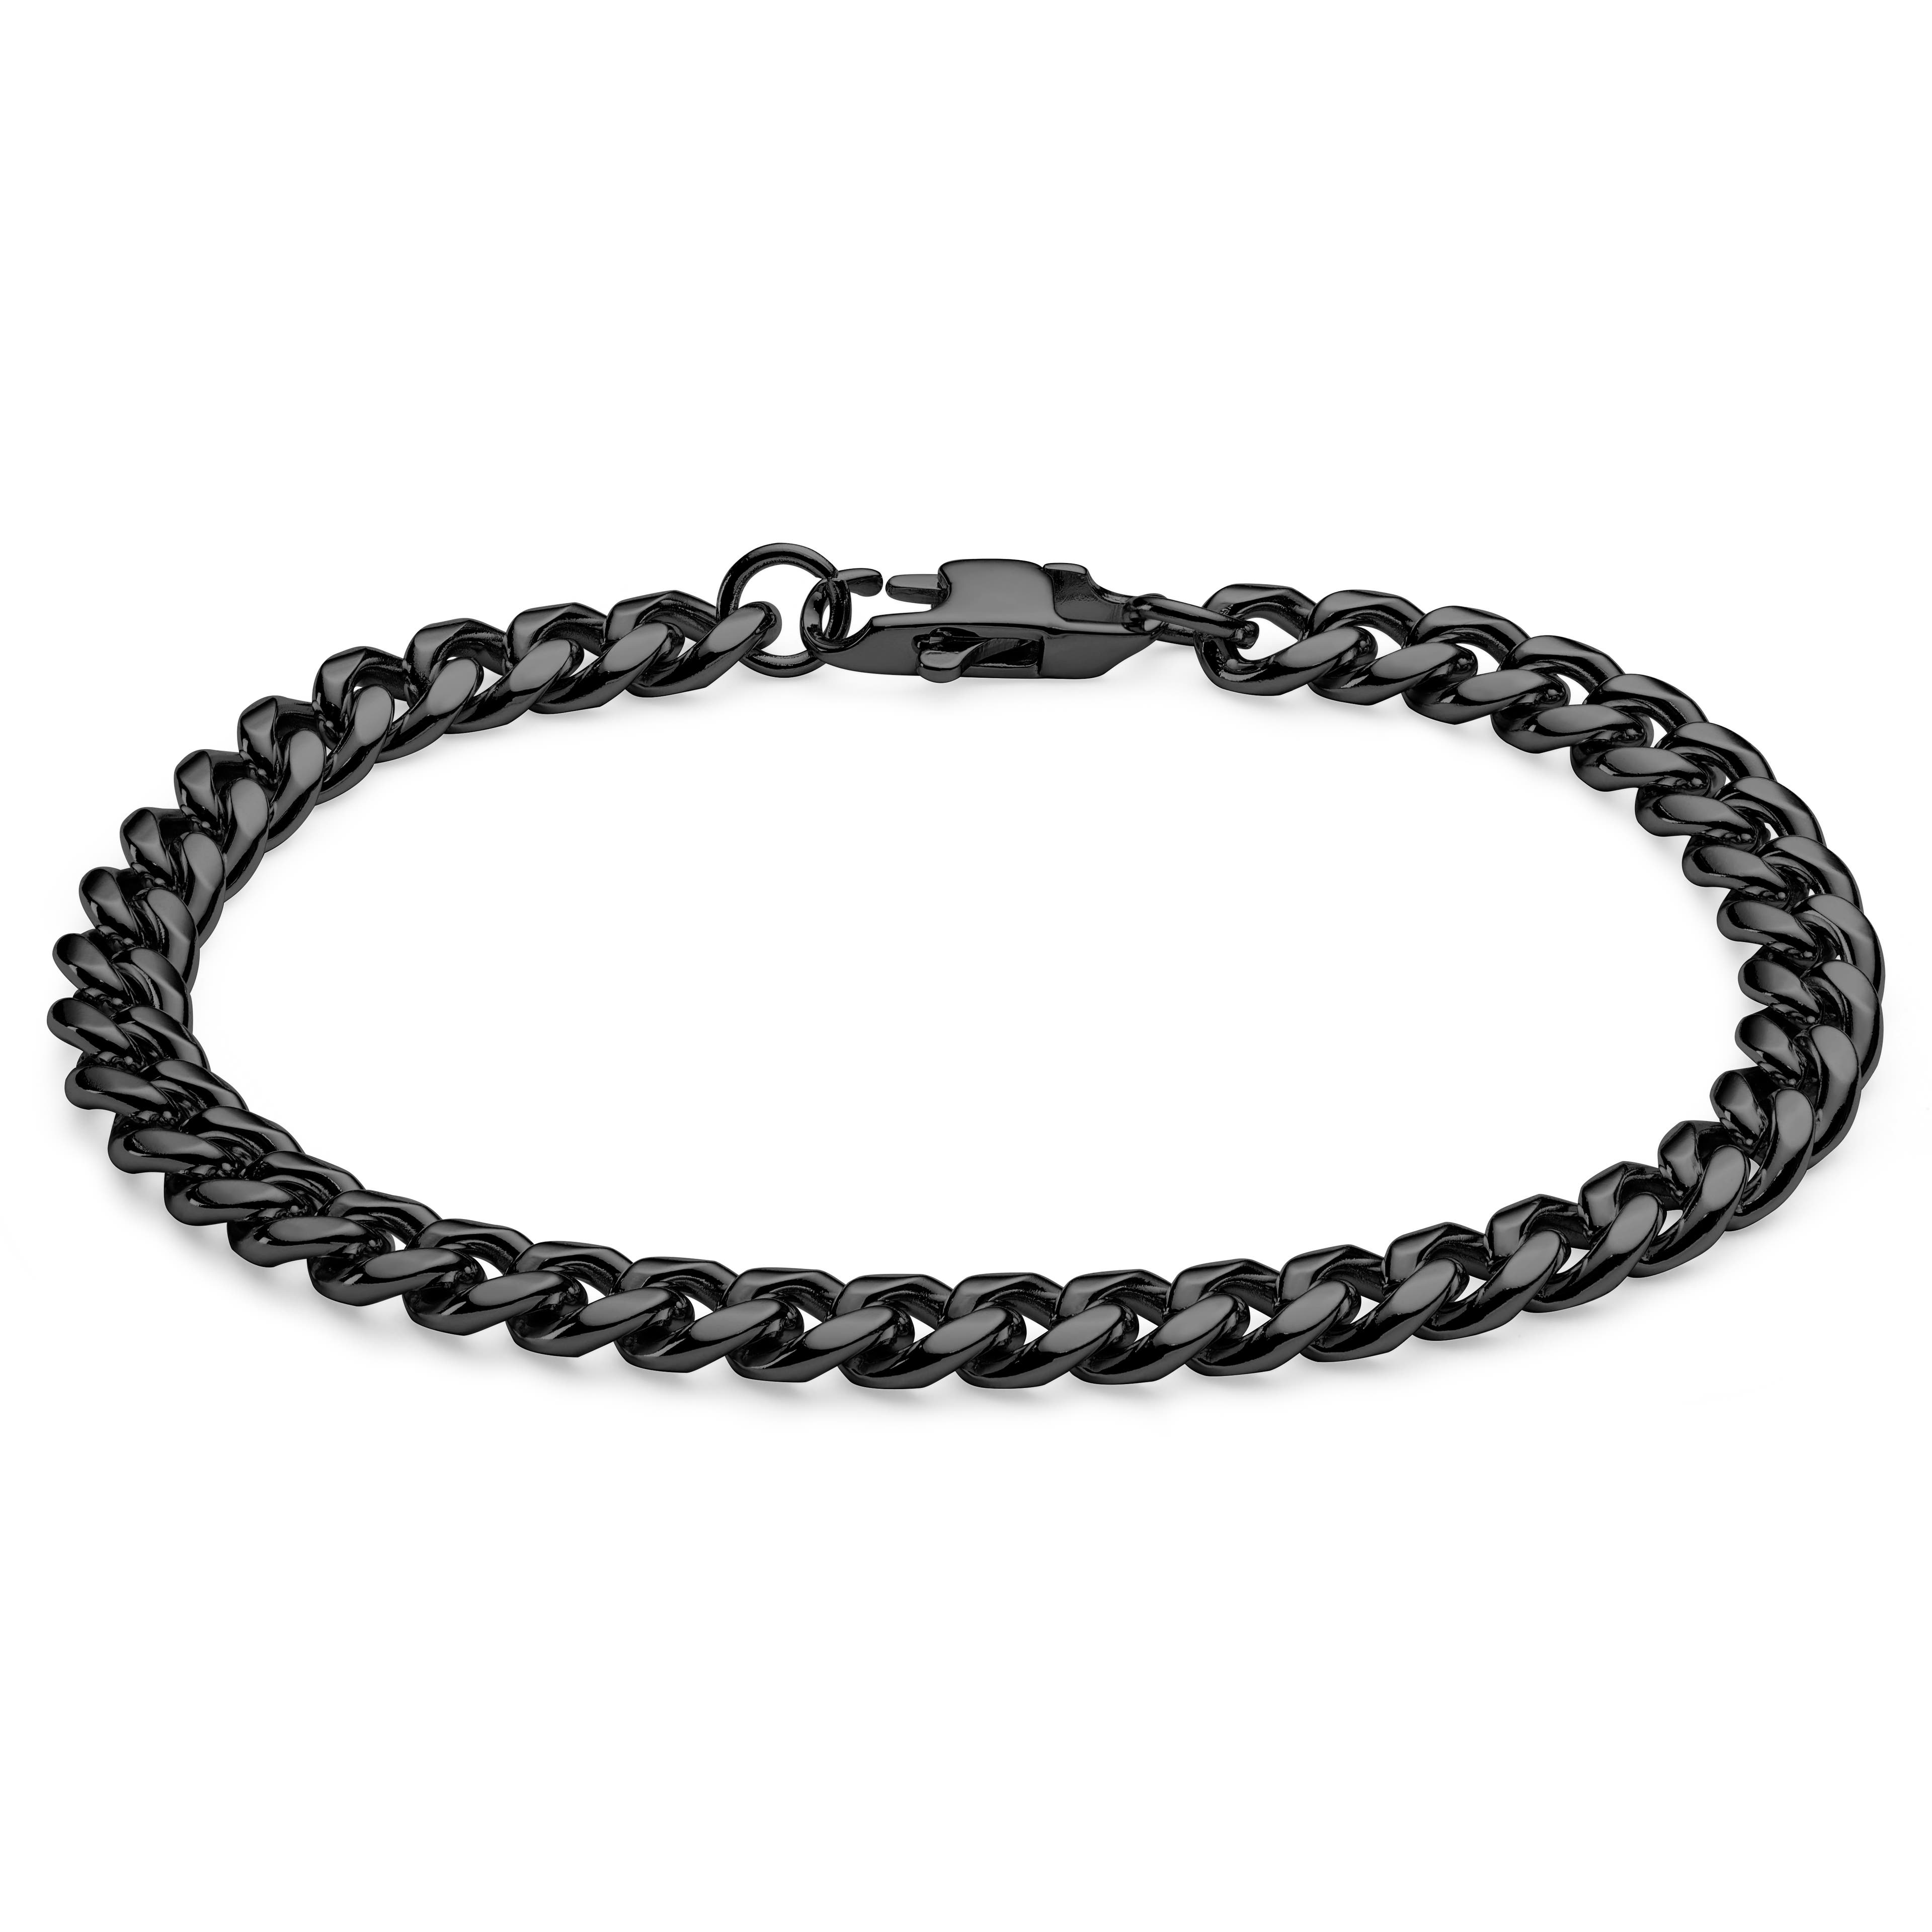 6mm Black Stainless Steel Curb Chain Bracelet